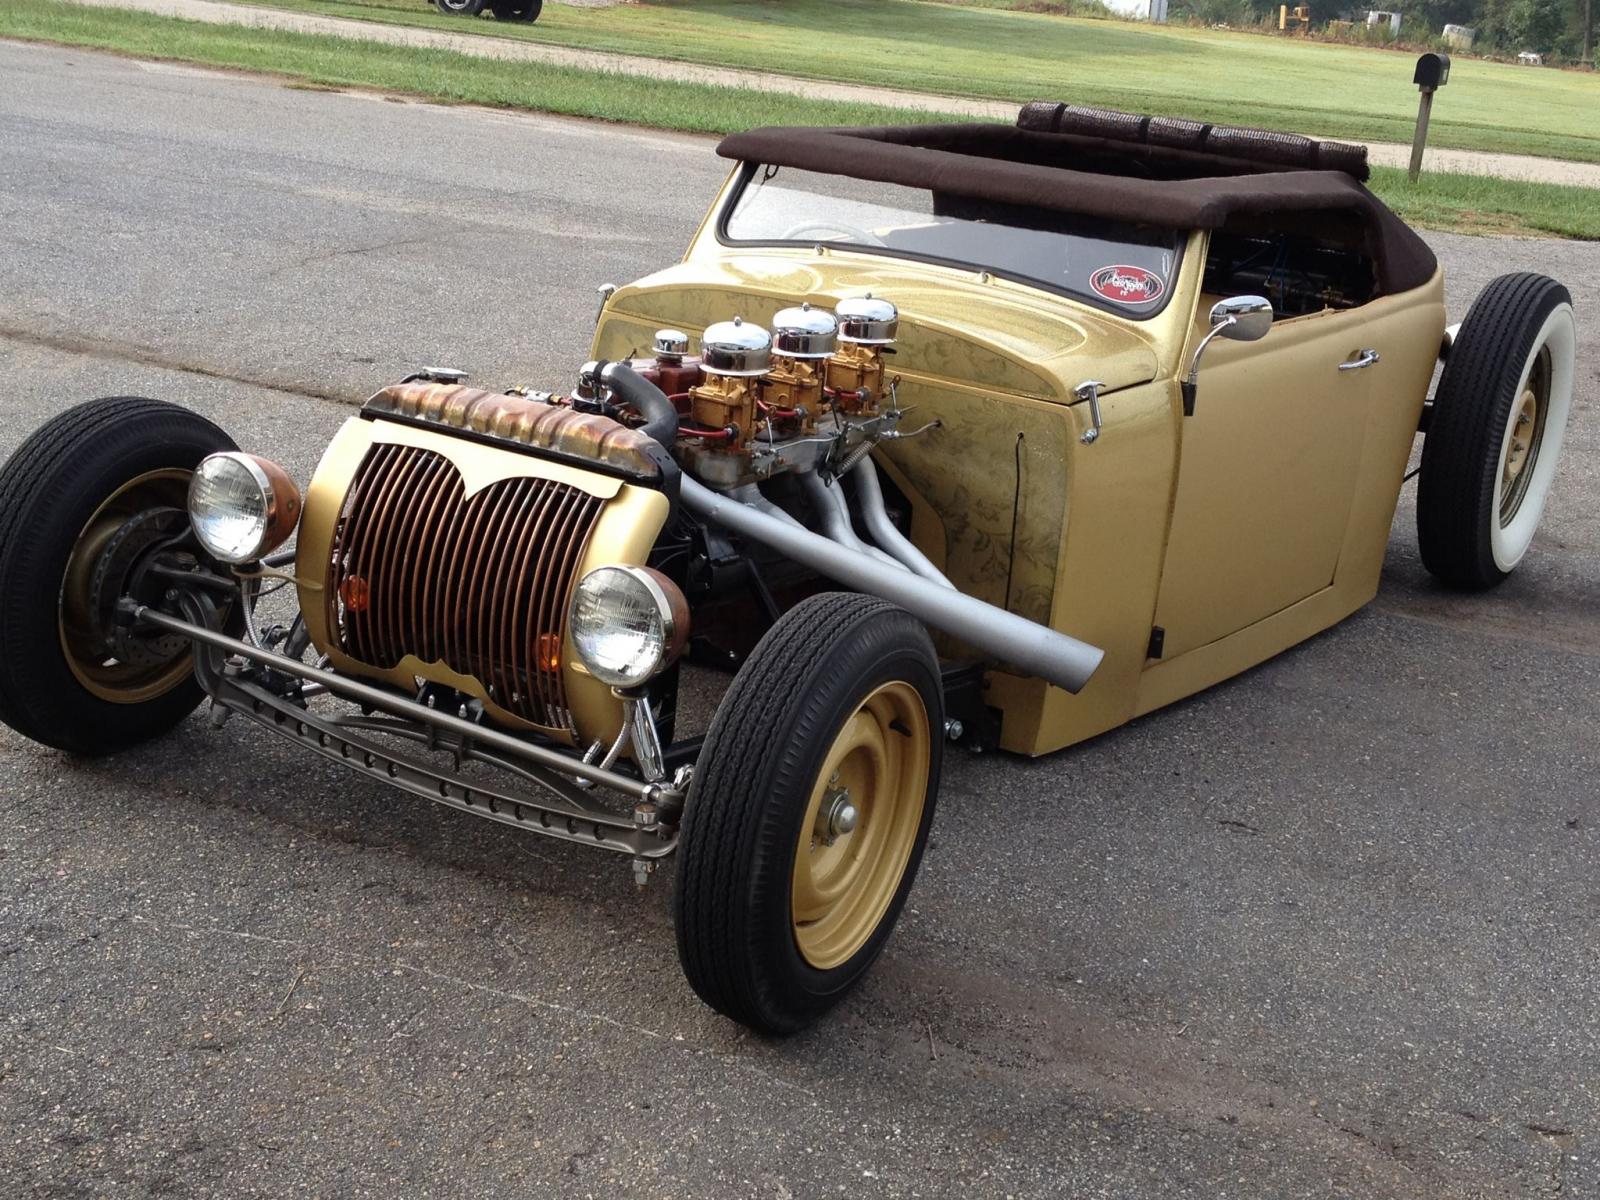 Brent Crocker's Awesome Front Engine Volksrod Convertible.